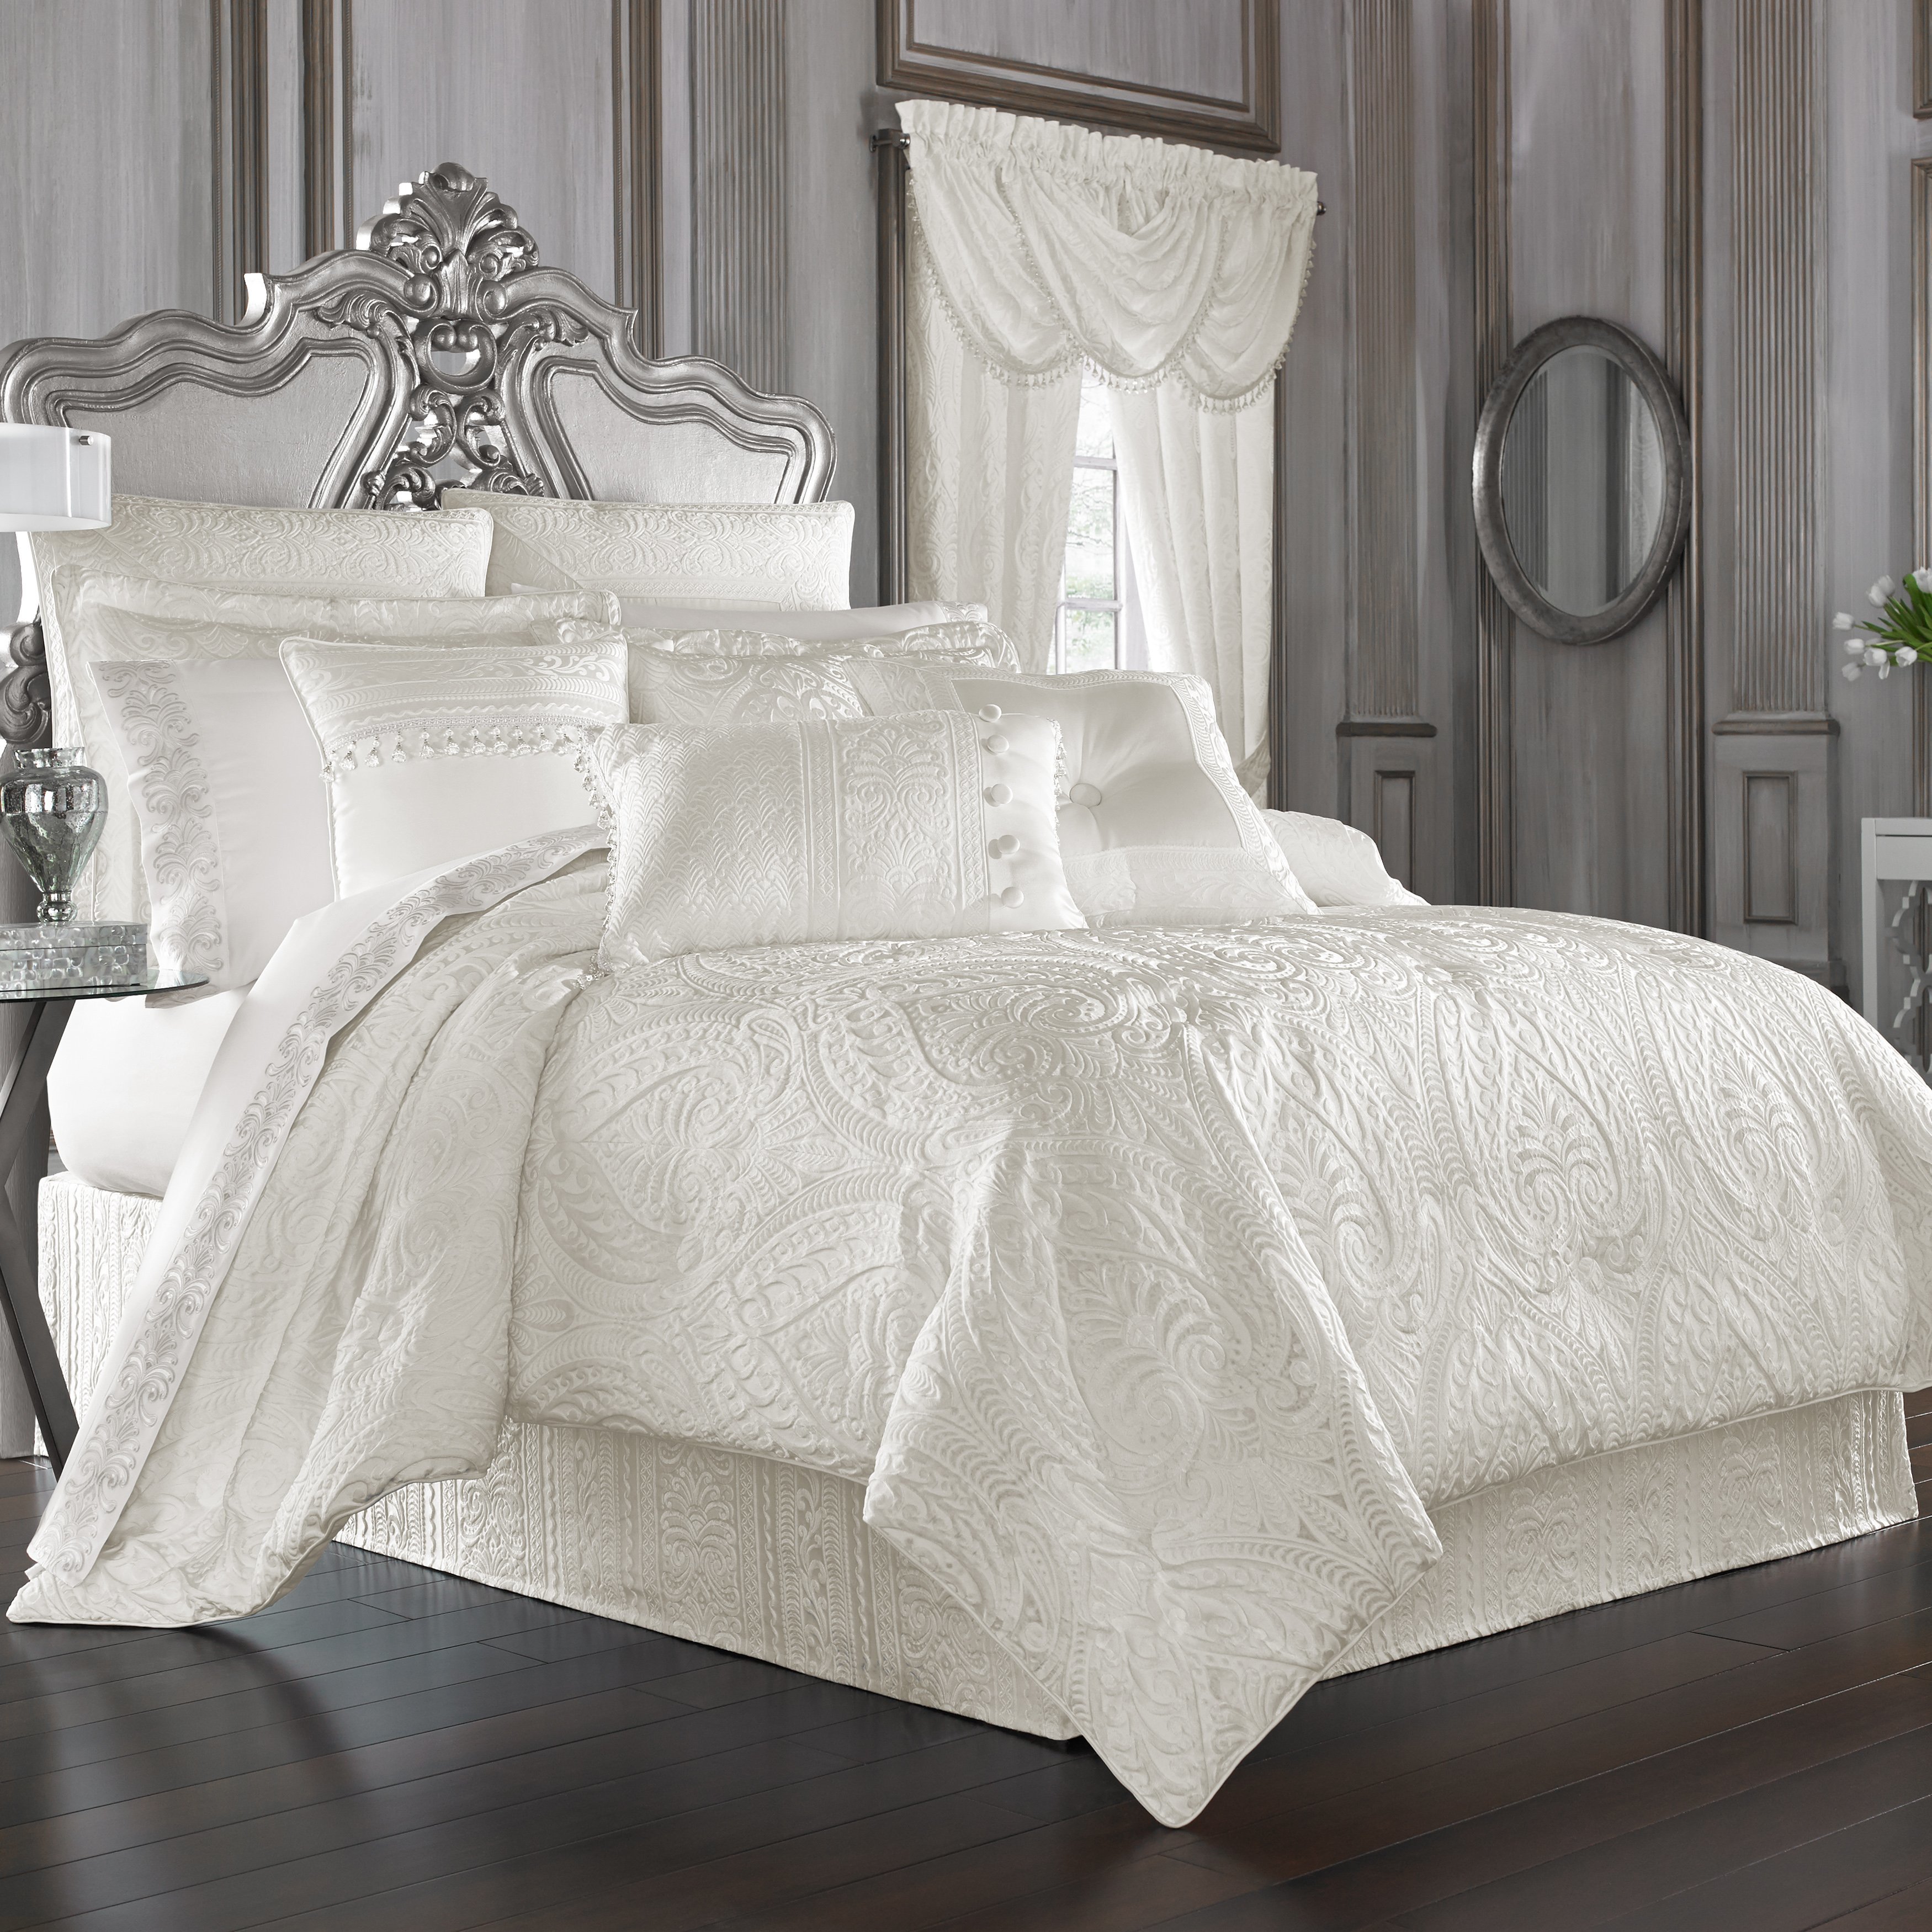 The Best 10 Ways to Keep Your White Comforter Sets White